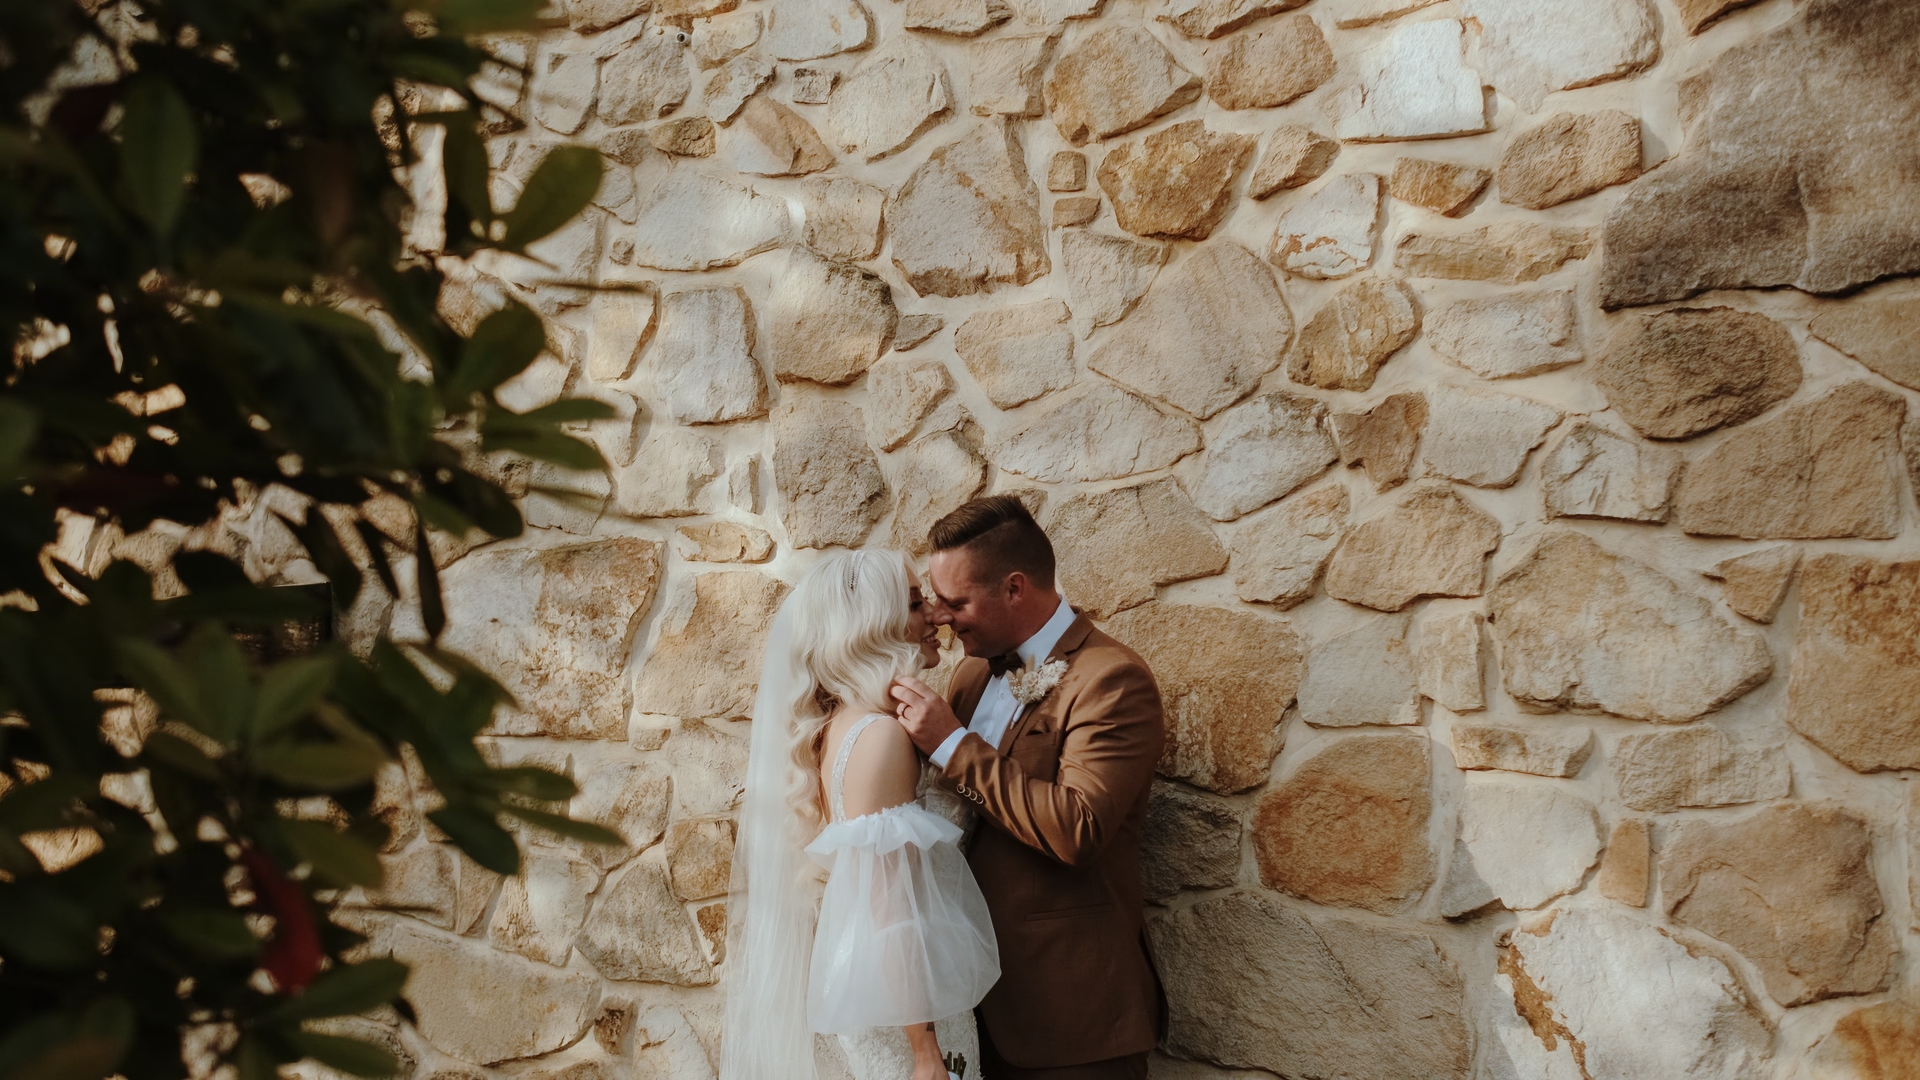 a bride and groom share an embrace in front of a stone wall, a screengrab from their wedding videographer